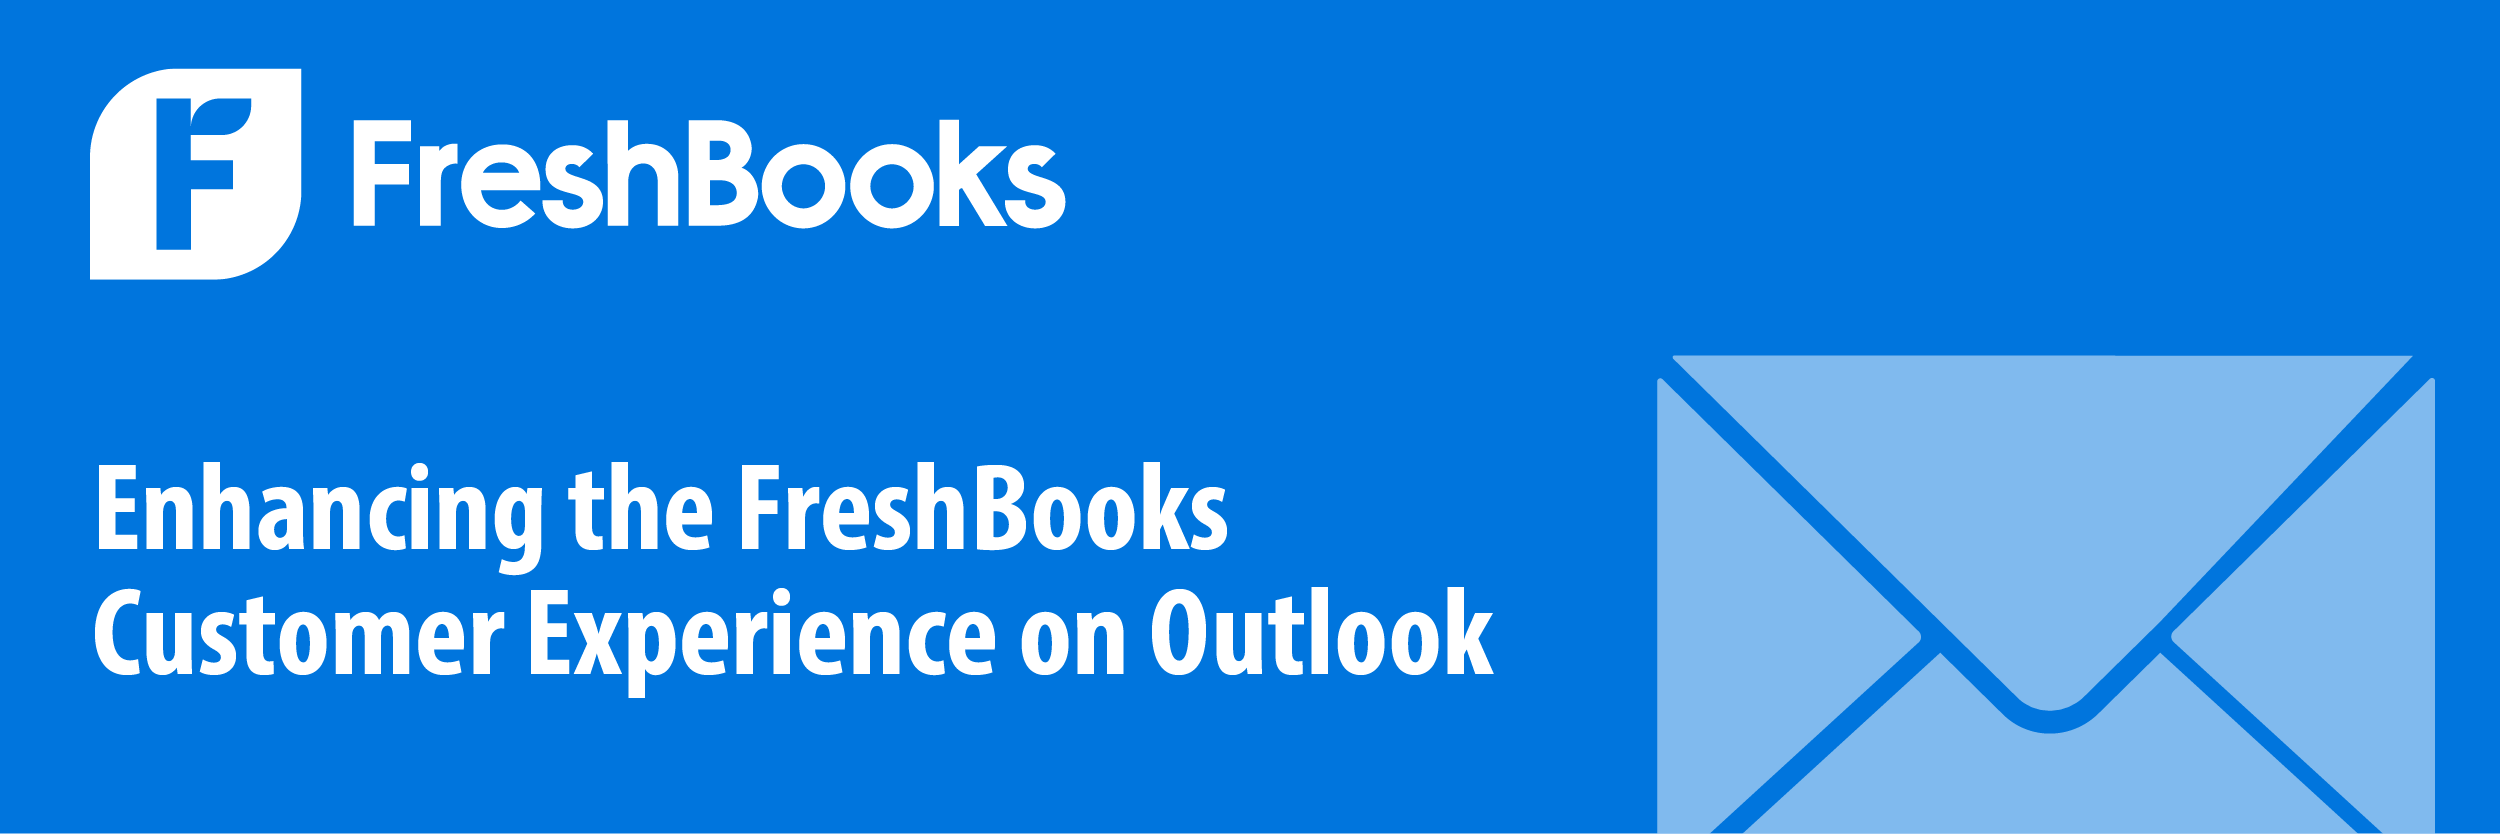 Freshbooks-case-study-banner Enhancing the FreshBooks Customer Experience on Outlook